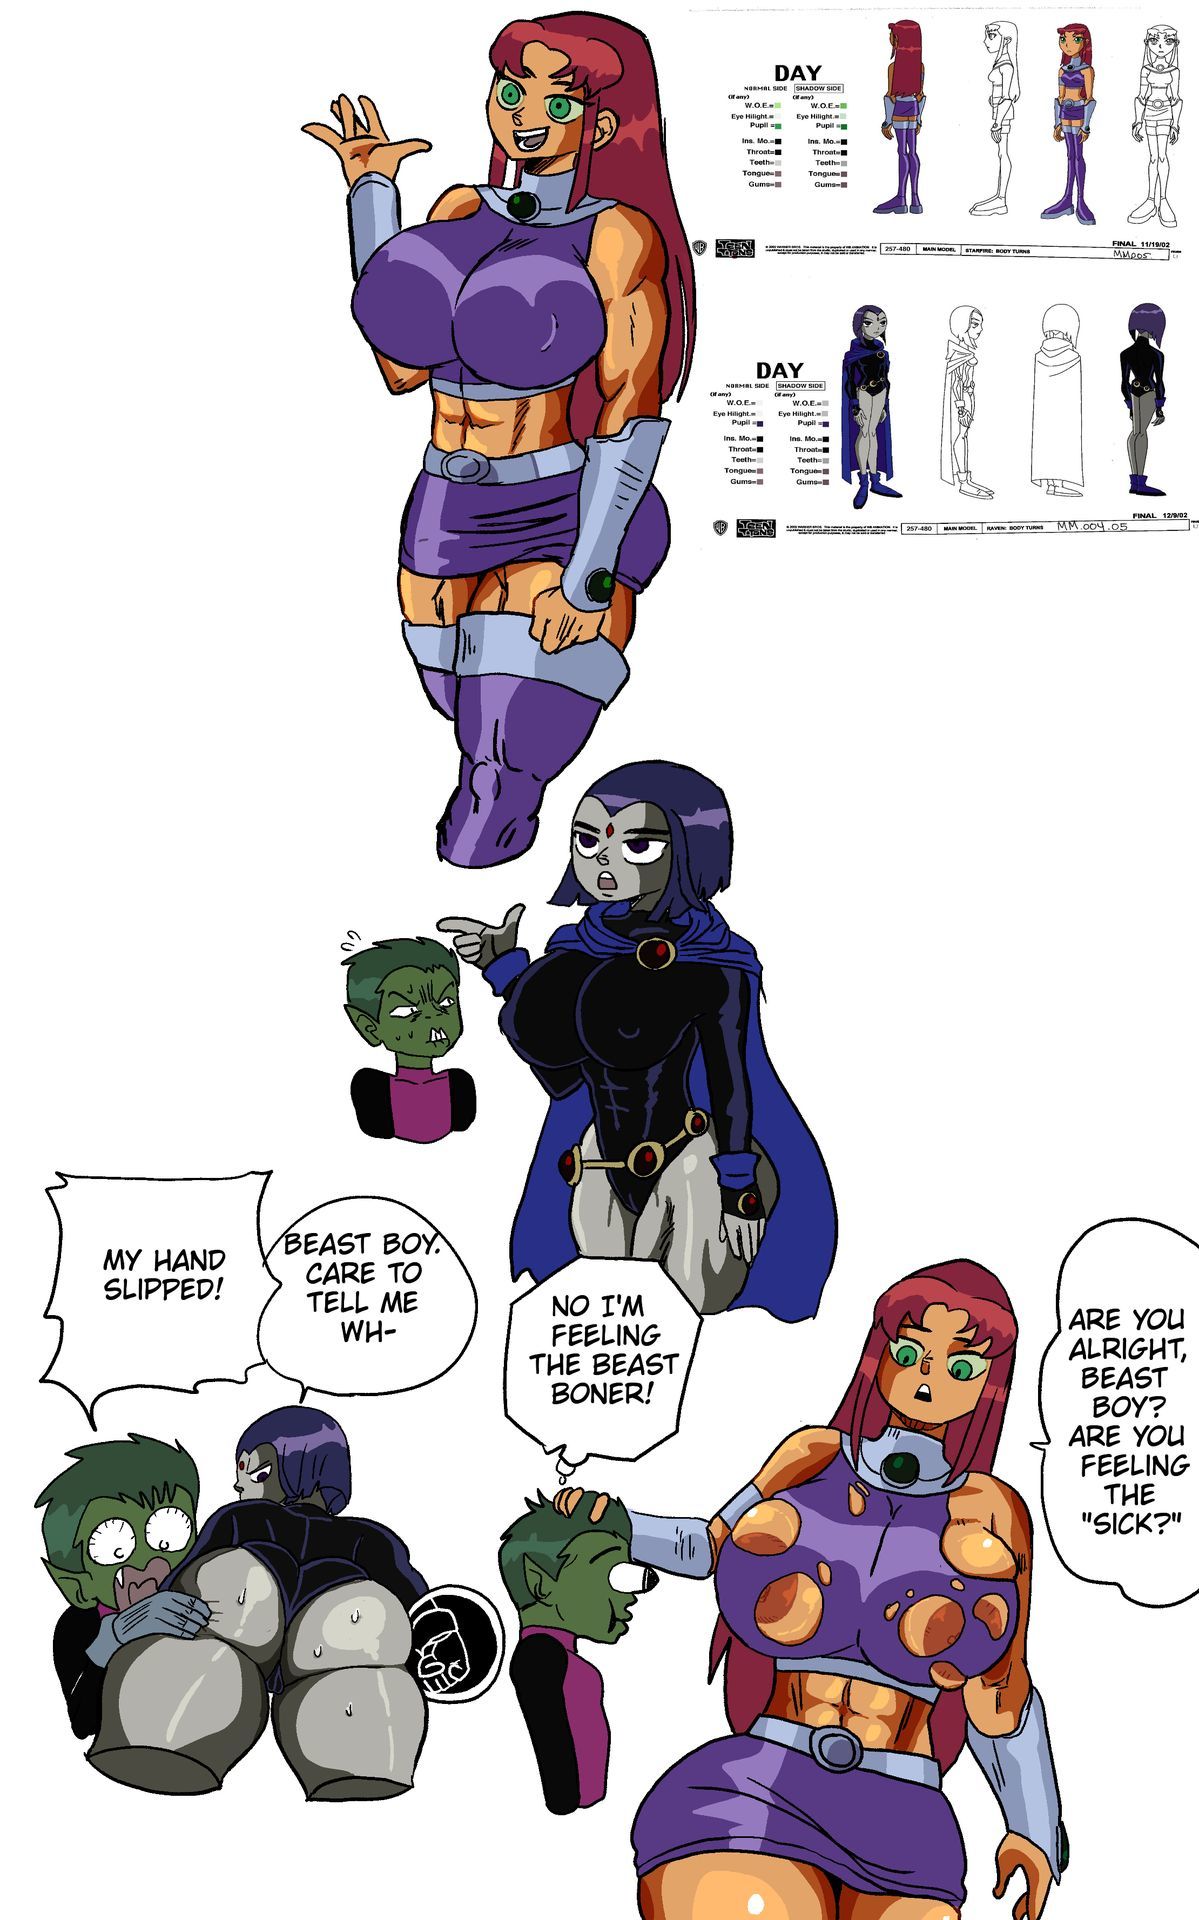 Teen Titans Relief by DoompyPomp page 2